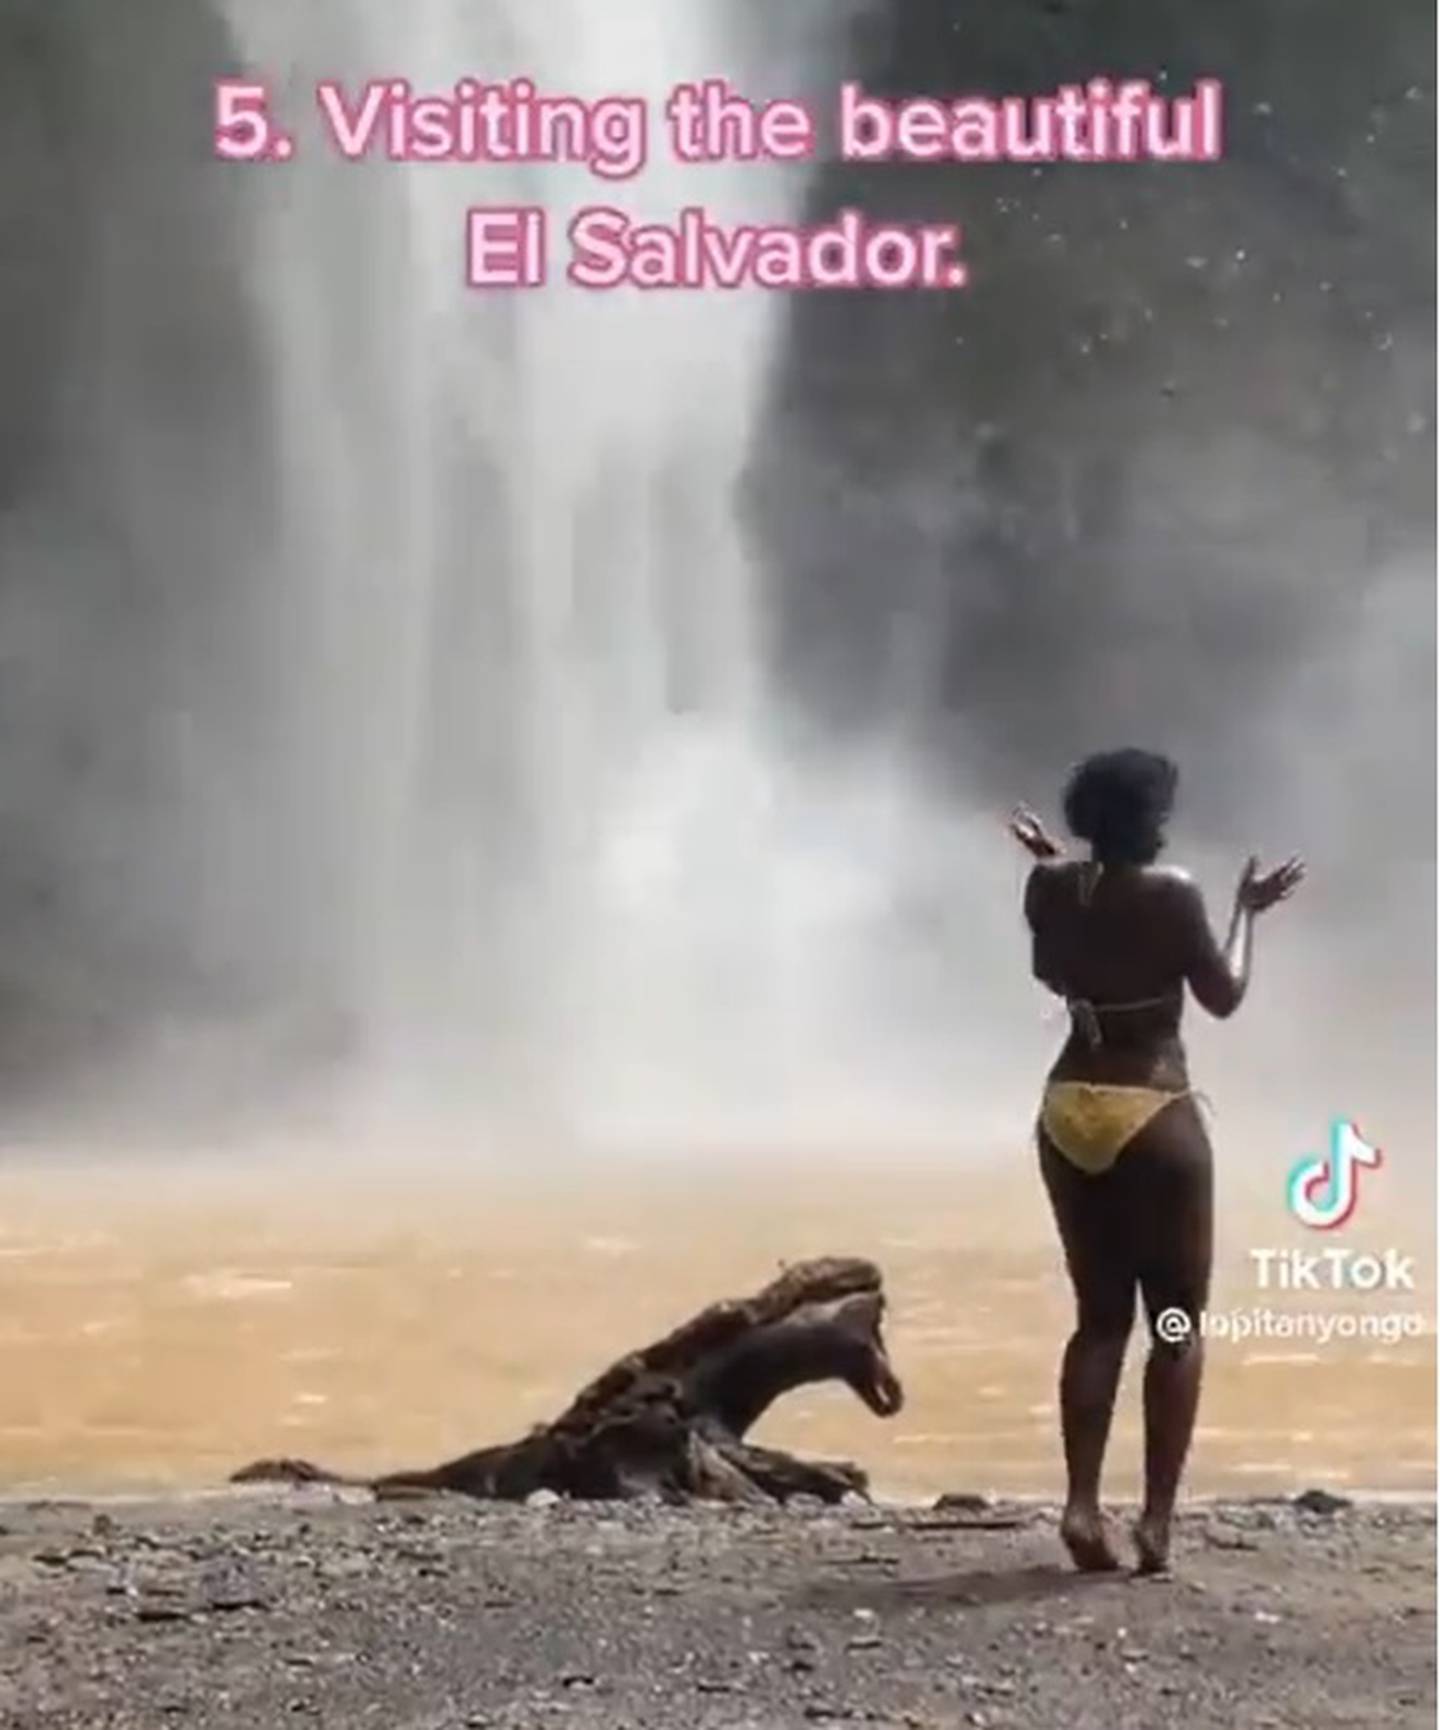 Lupita Nyong'o highlighted her visit to El Salvador among her top 10 best moments of 2022.dfd